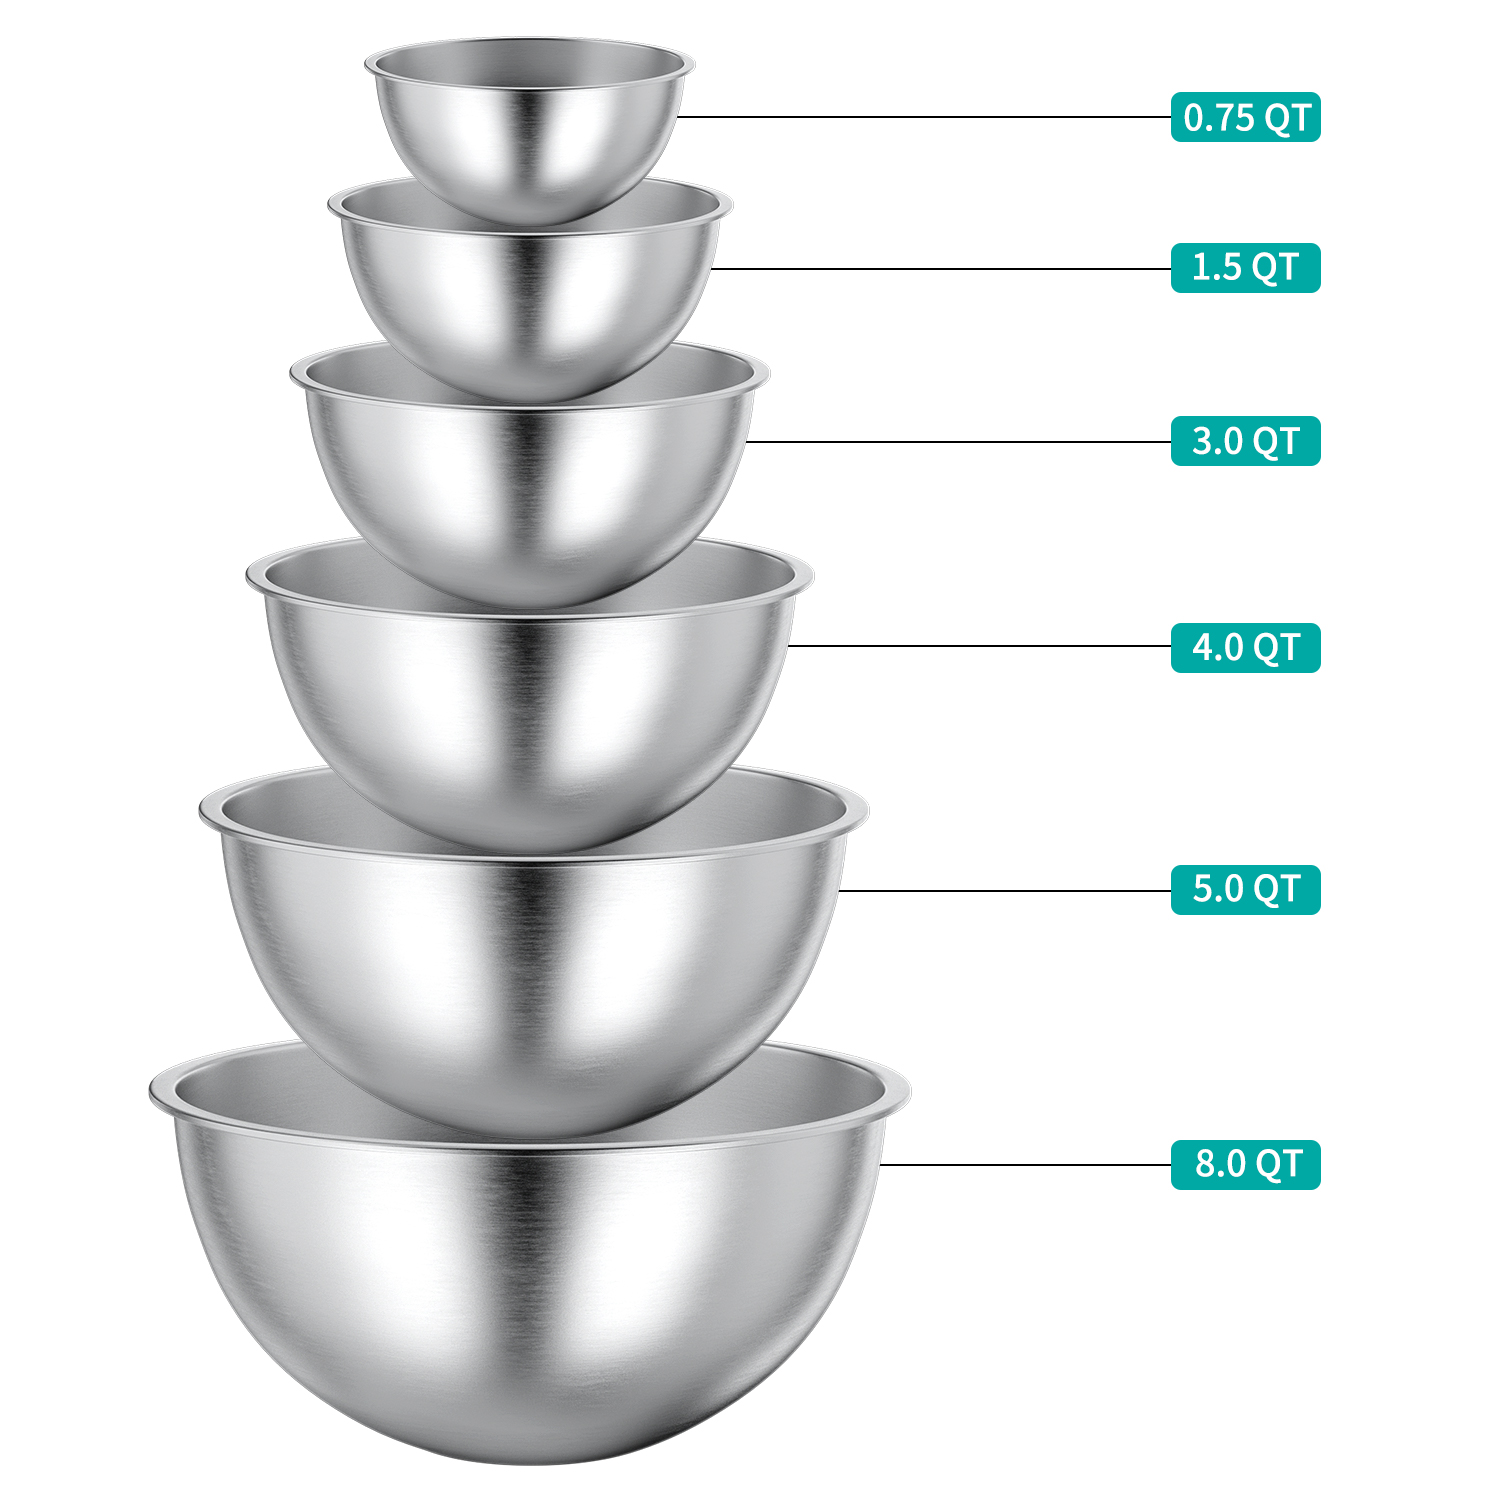 TINANA Mixing Bowls Set, Stainless Steel Mixing Bowls, 6 PCS Metal Nesting Storage Bowls for Kitchen, Size 8, 5, 4, 3, 1.5, 0.75 QT, Great for Prep, Baking, Serving - image 3 of 7